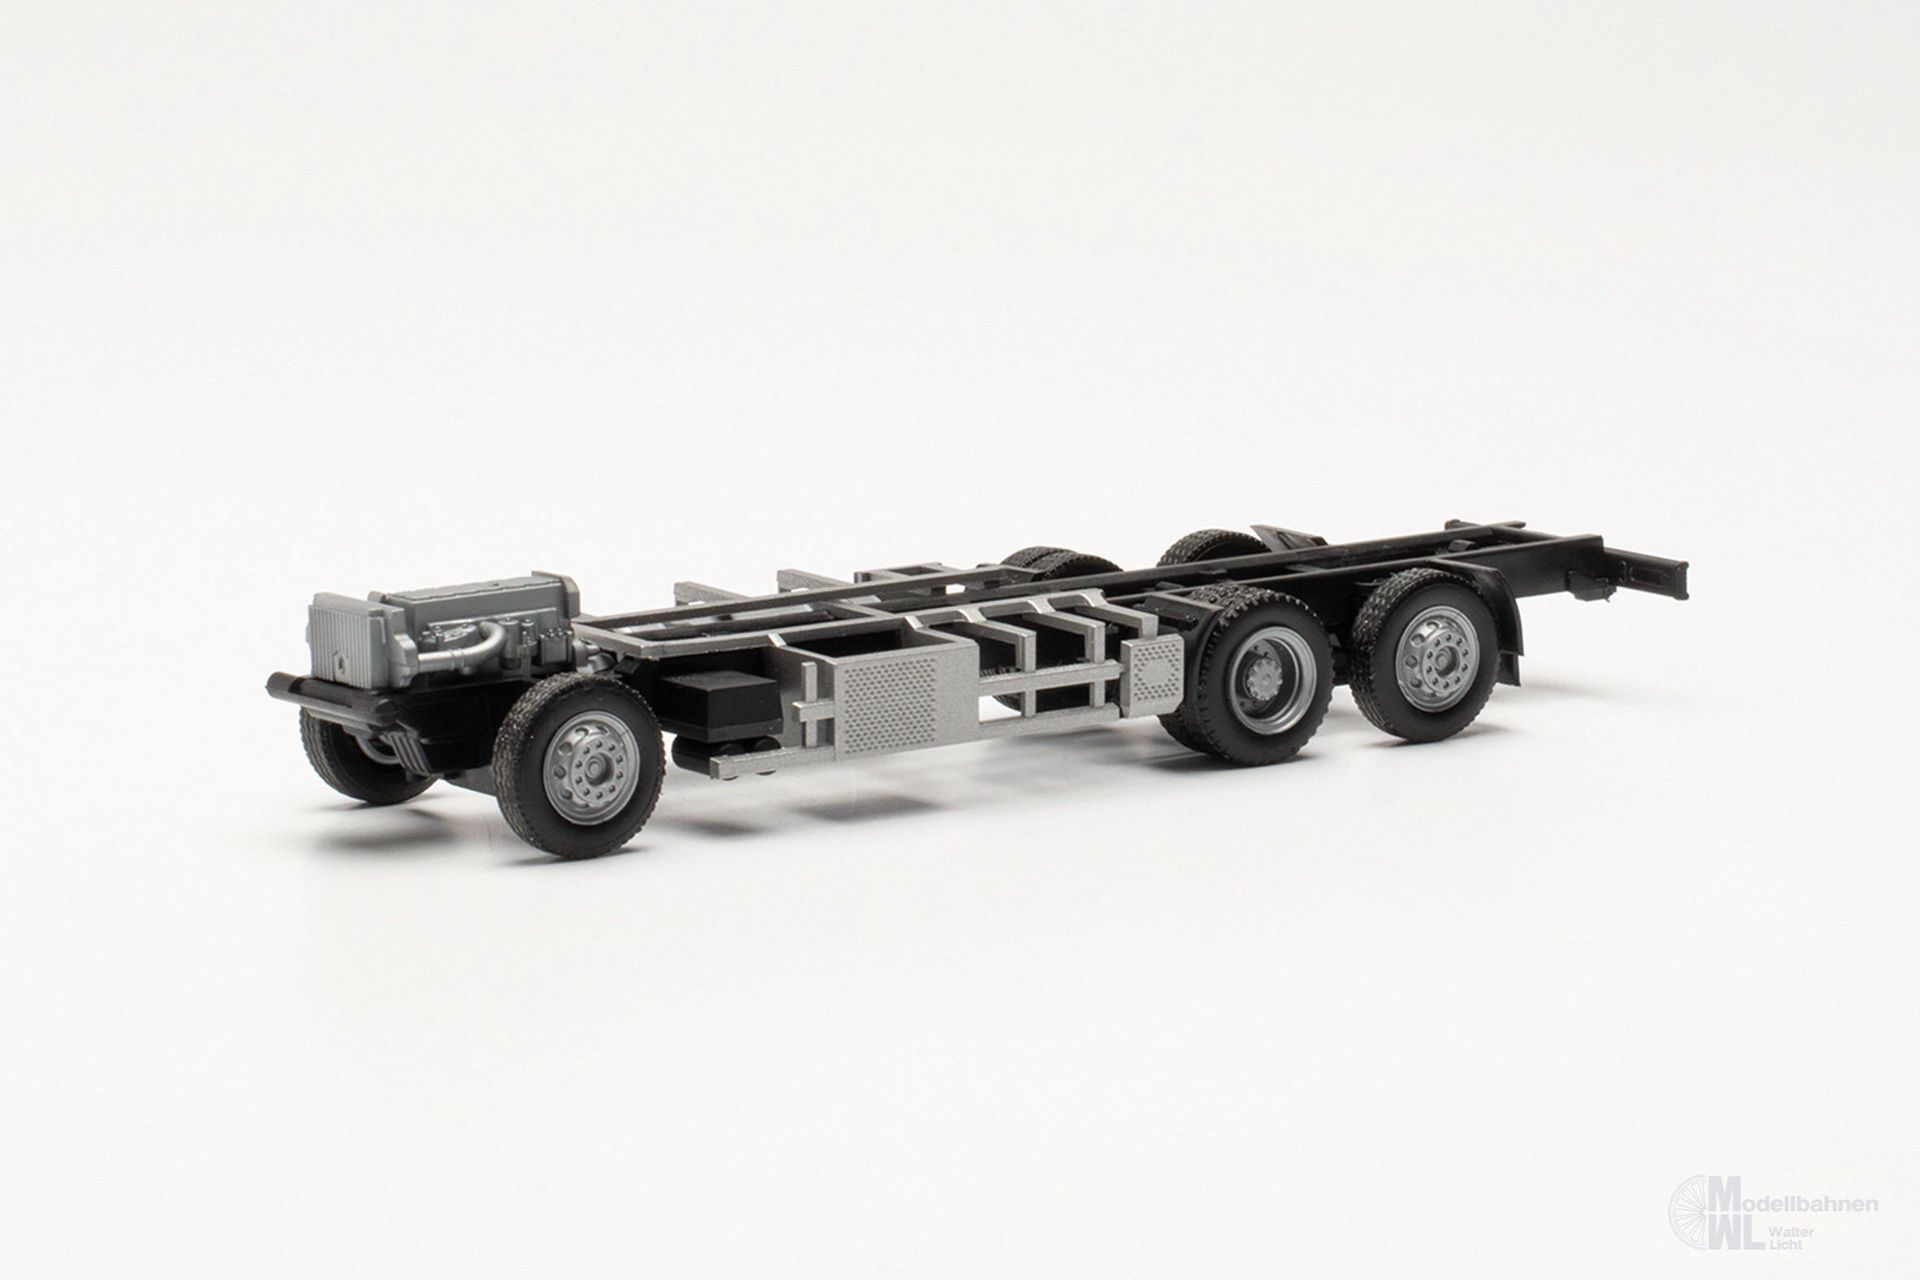 Herpa 85519 - TS FG Iveco S-Way LNG 7,82m H0 1:87